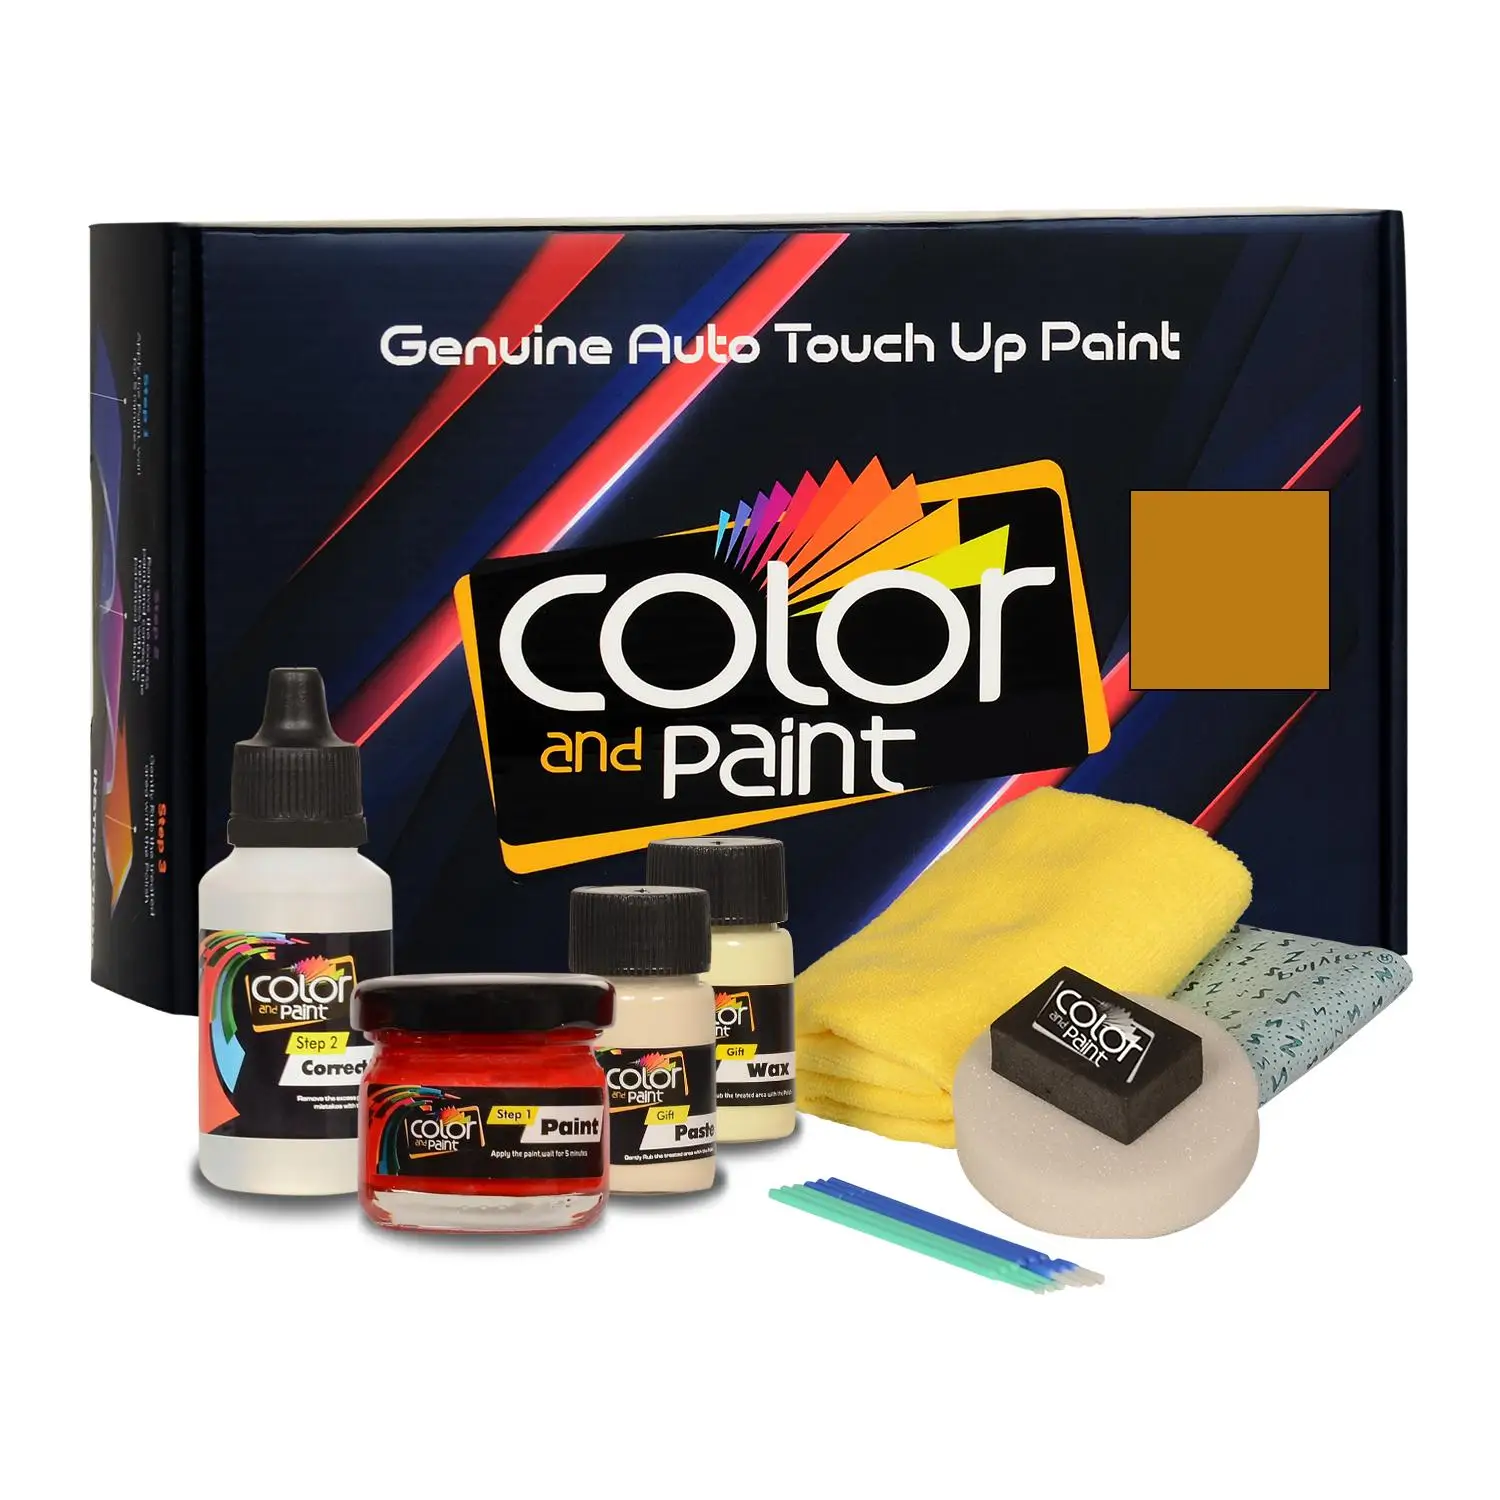 

Color and Paint compatible with Mitsubishi Automotive Touch Up Paint - SAN MARINO YELLOW - Y59 - Basic Care